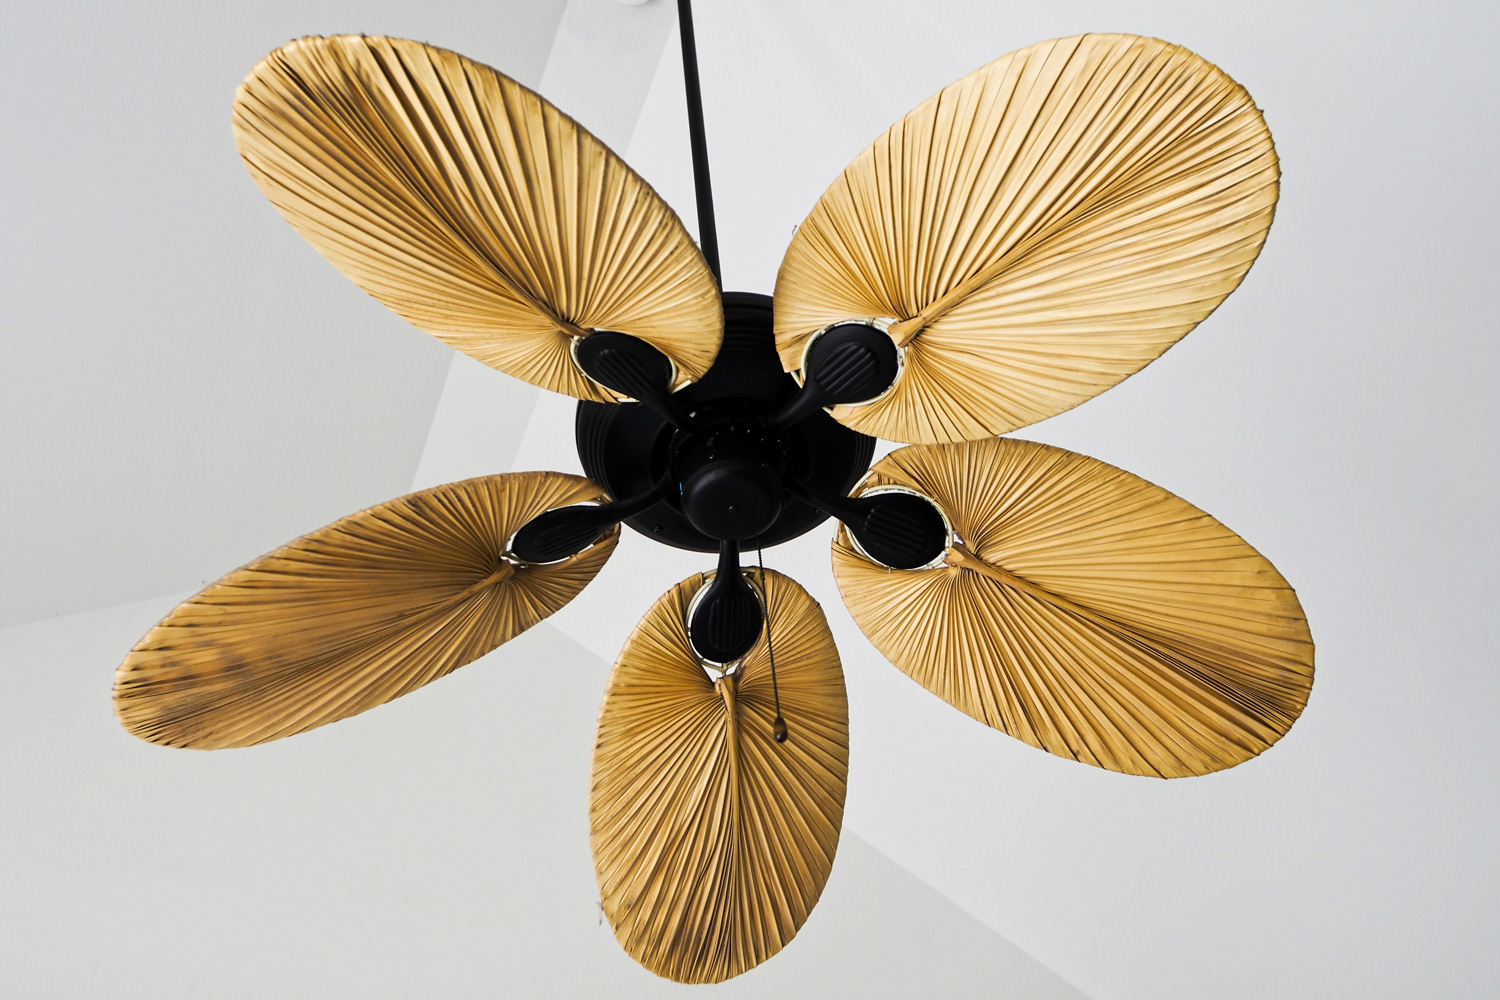 Electric wooden ceiling fan on white background. Interior ideas.